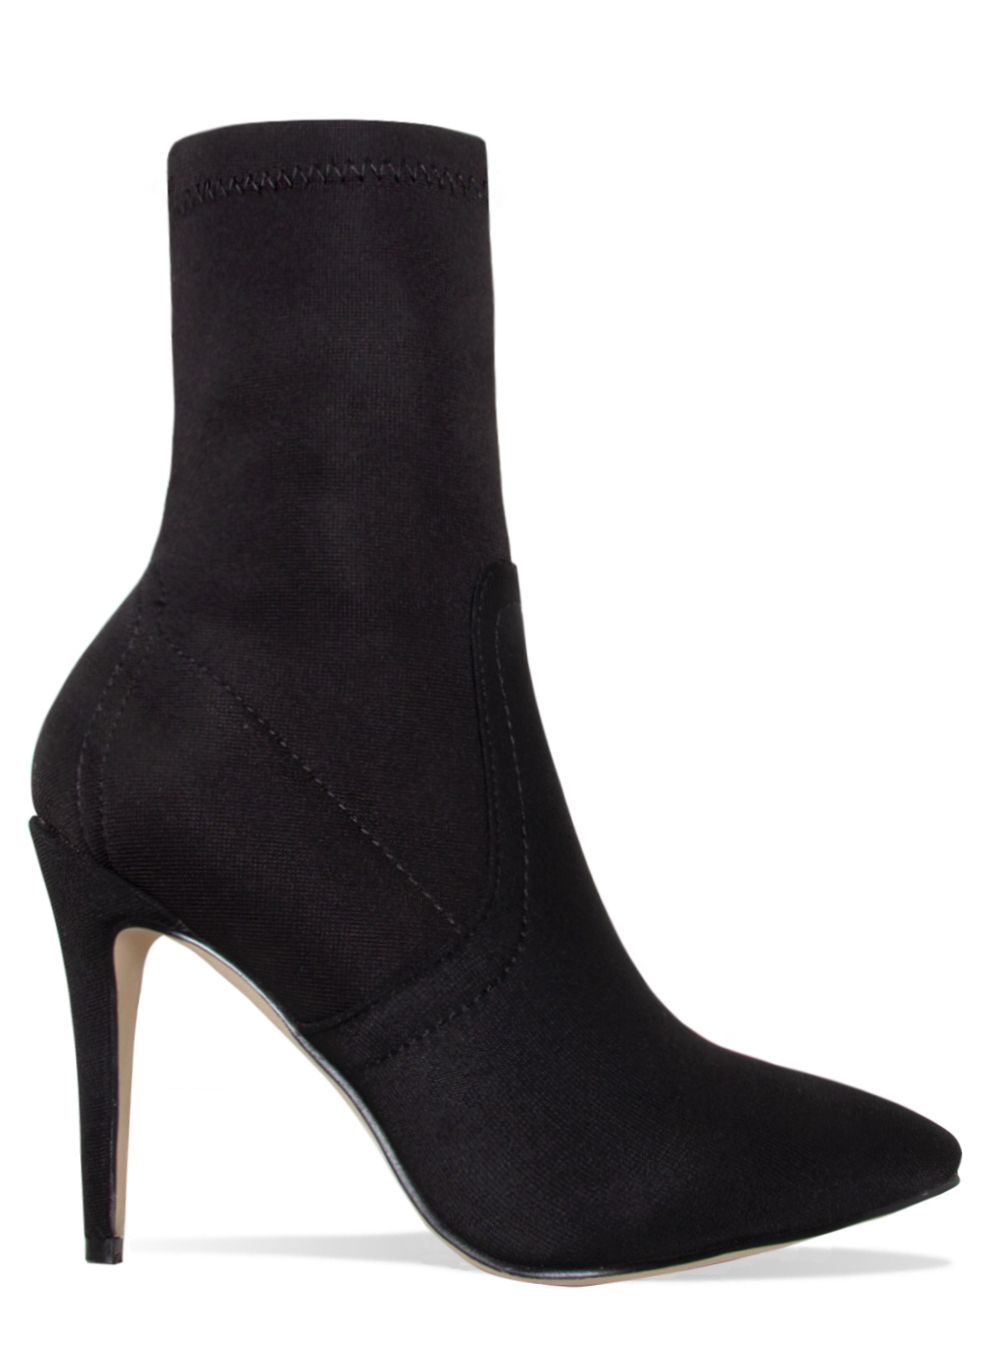 Angie Black Ribbed Stiletto Ankle Boots